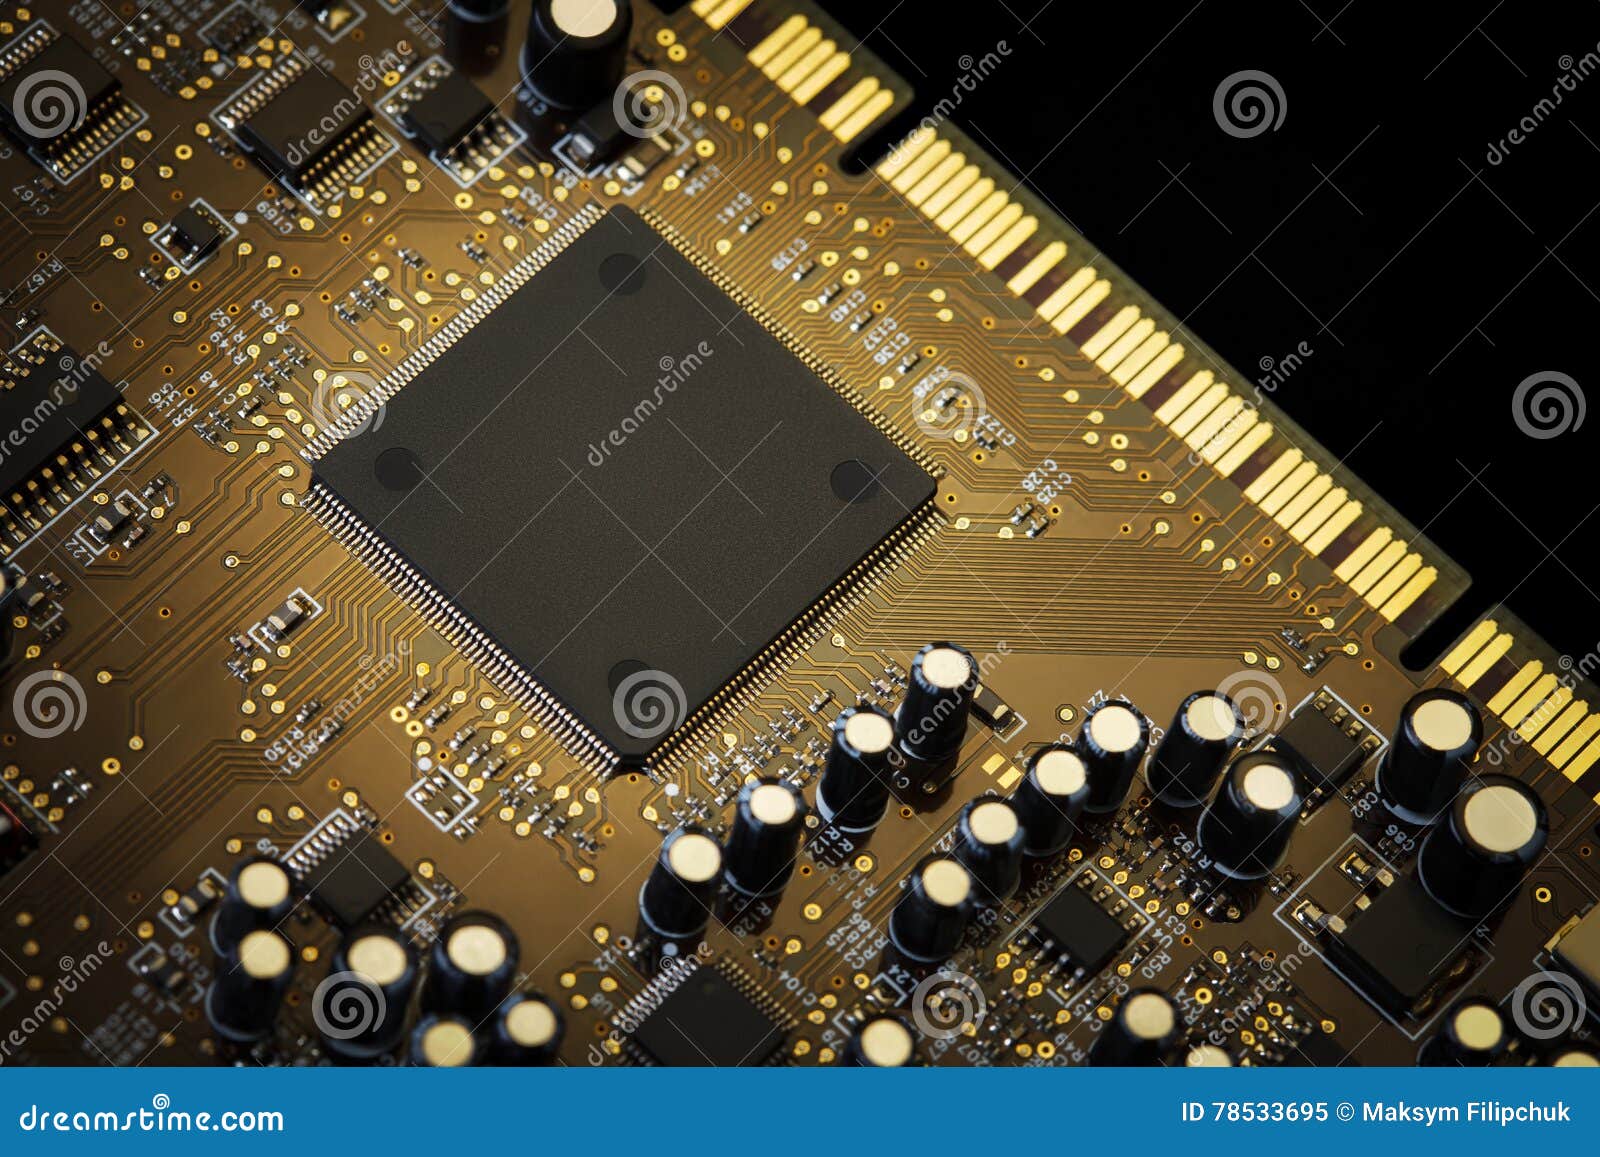 Luxury Sound Processor On Motherboard Stock Image - Image of selective